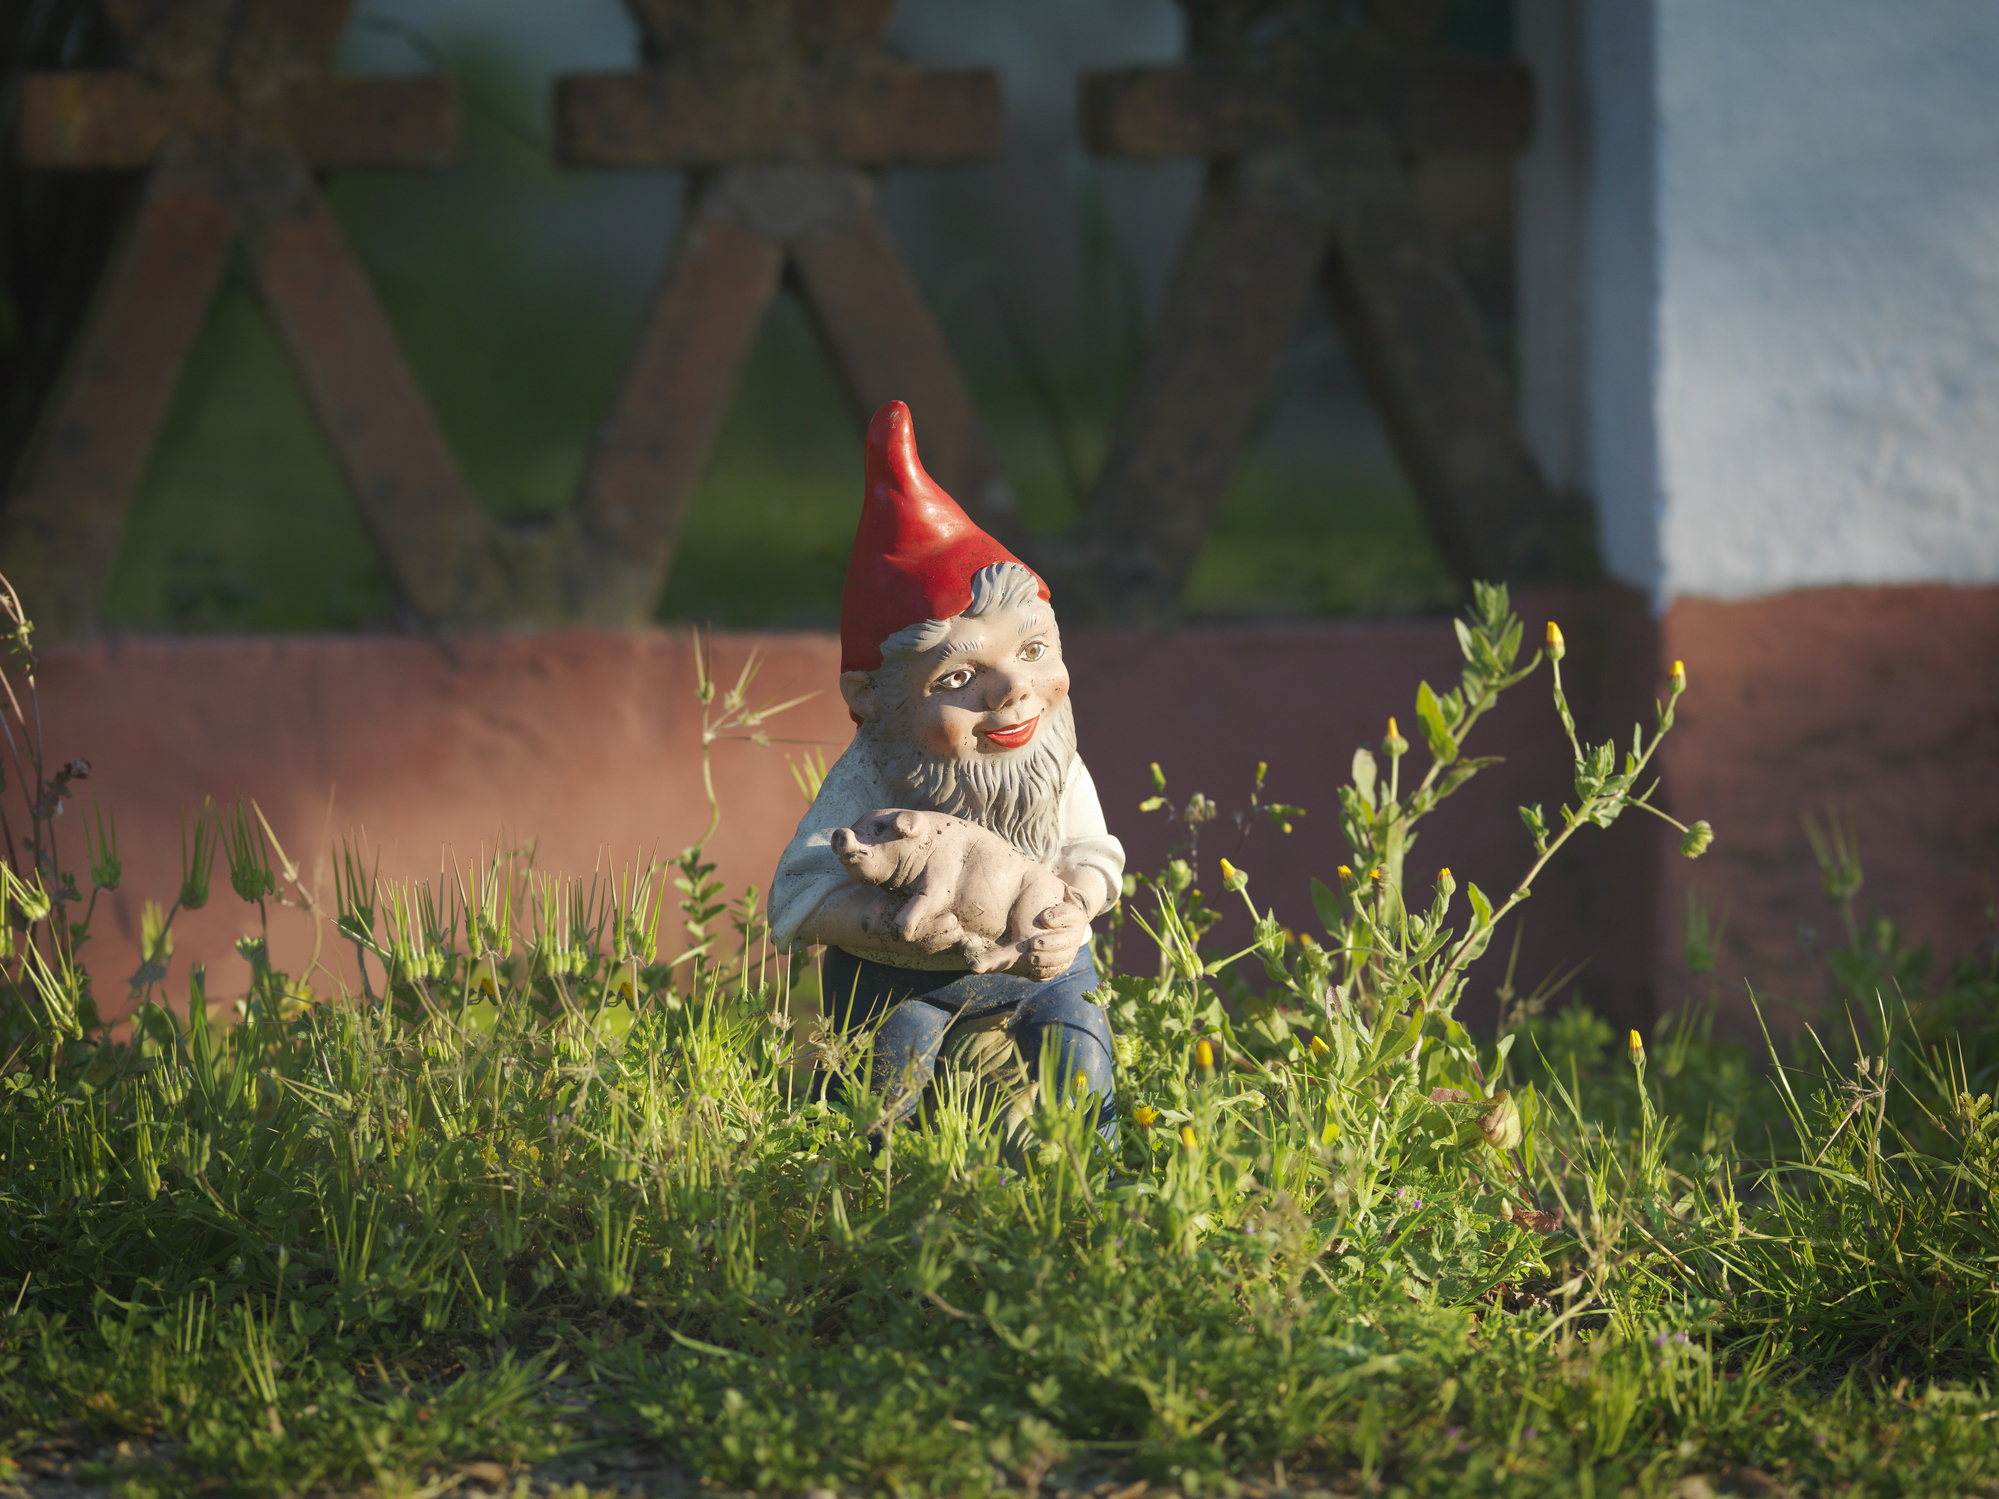 Garden gnome with a red hat and beige shirt holding a piglet, sitting in green grass